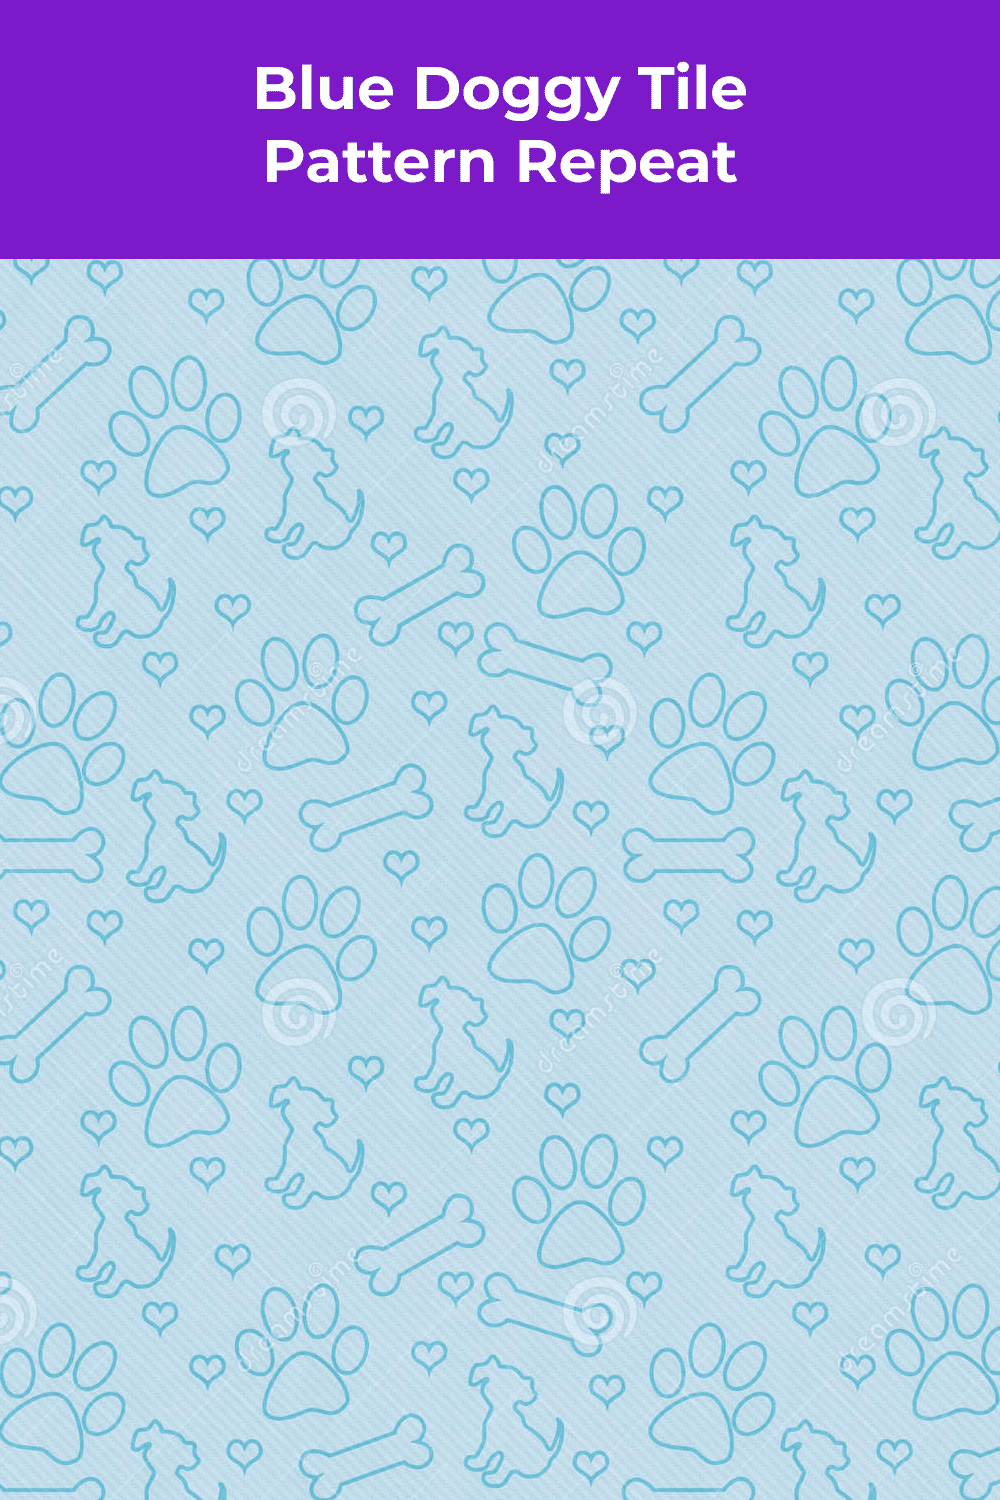 Blue doggy tile pattern repeat.